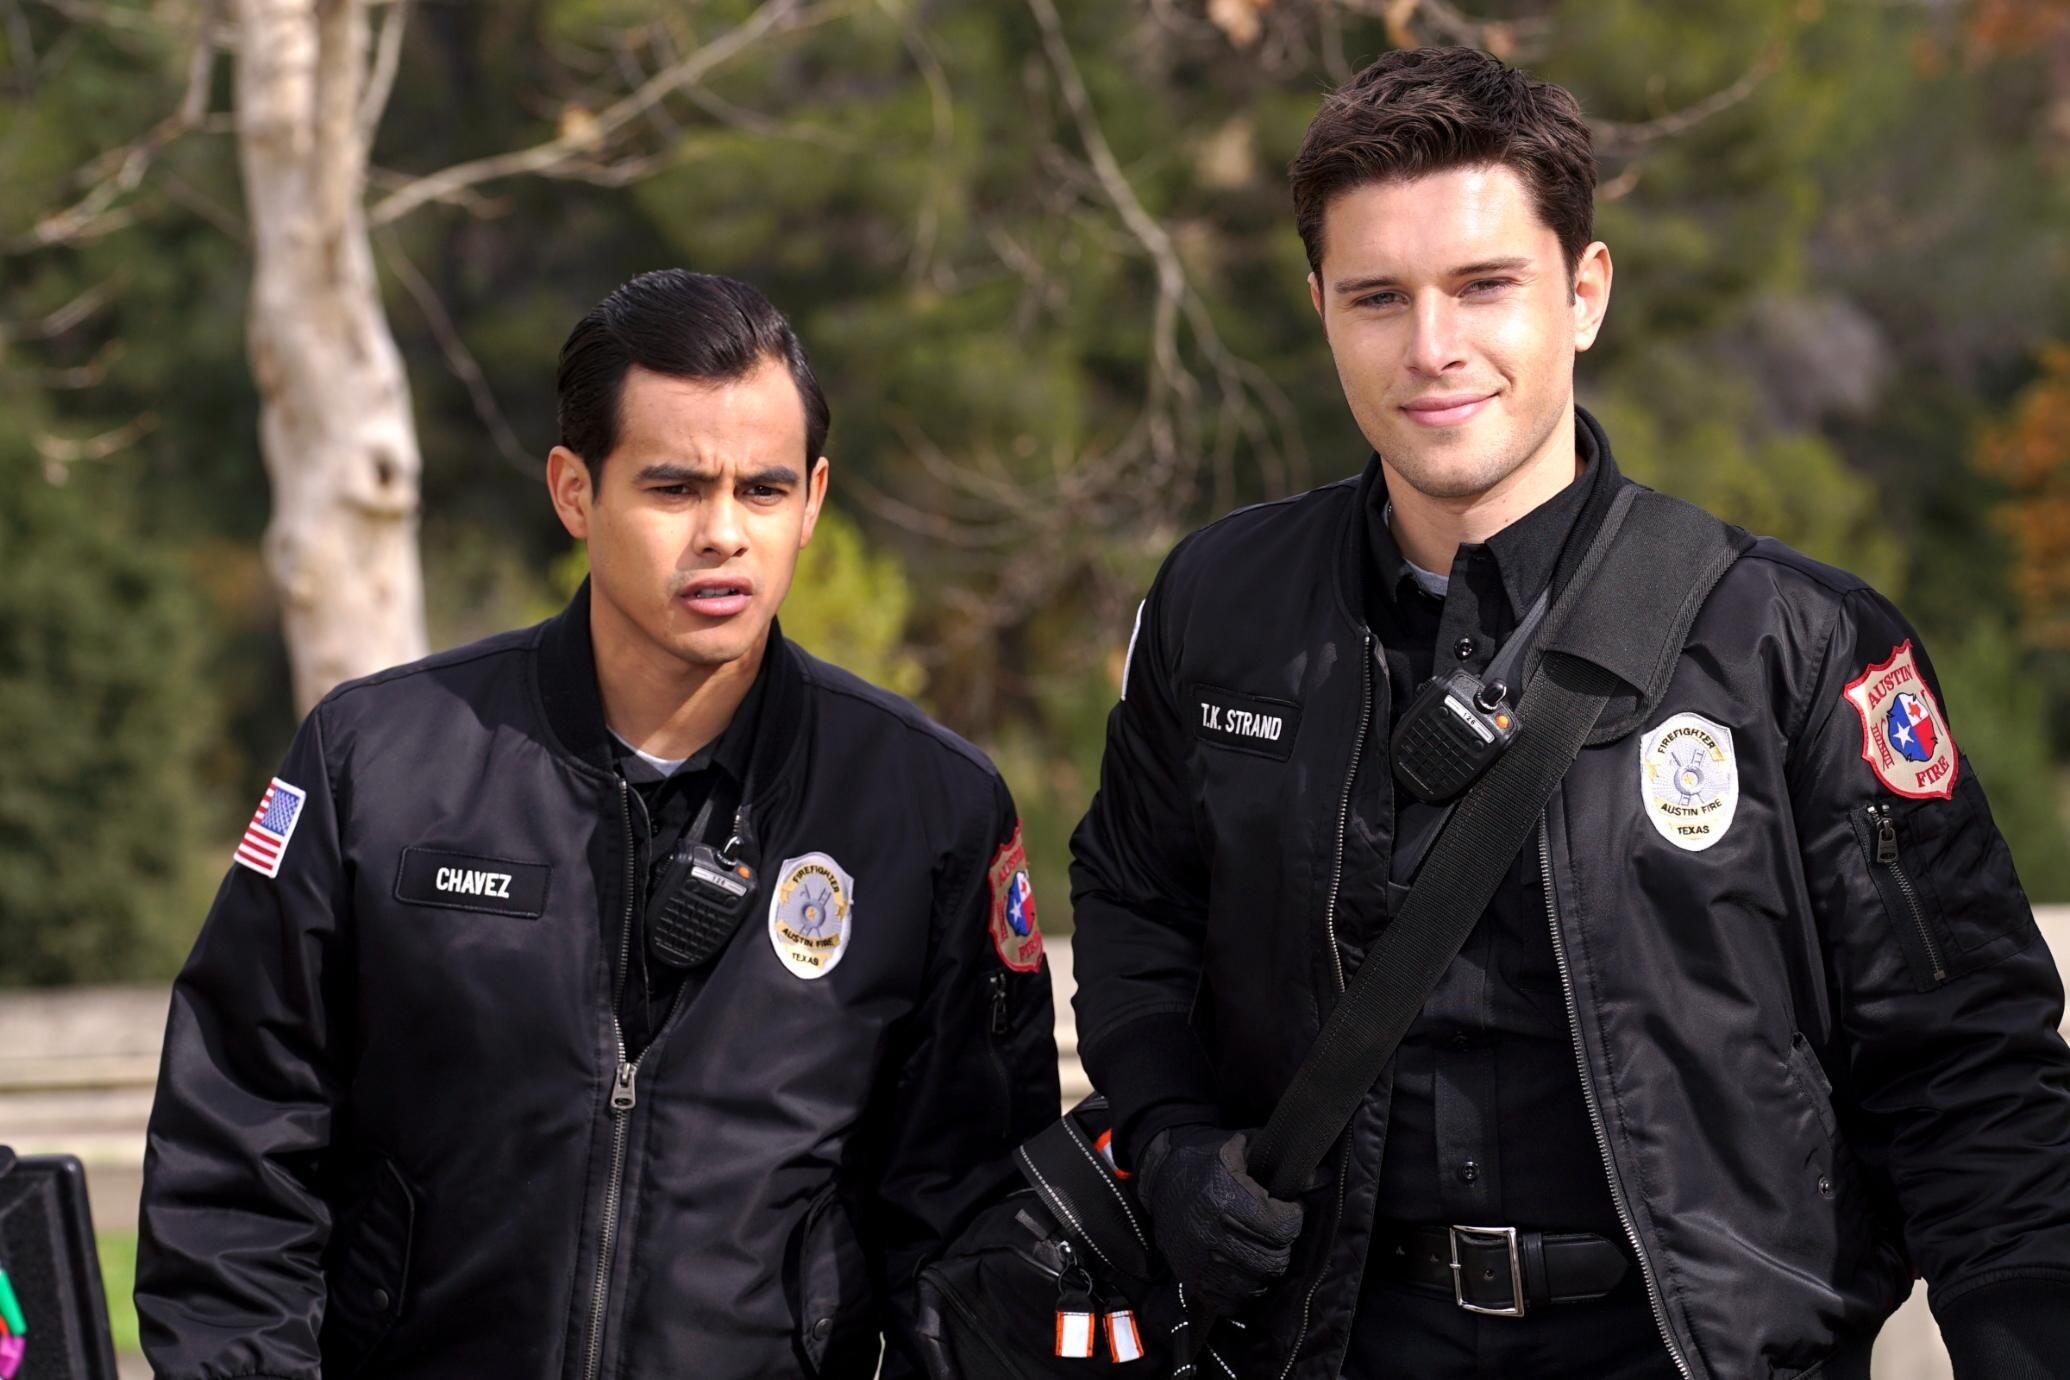 9-1-1: Lone Star (TV Series): Julian Works As Mateo Chavez And "TK" Strand, Fire Crew's Equipment, Firefighters. 2070x1380 HD Wallpaper.